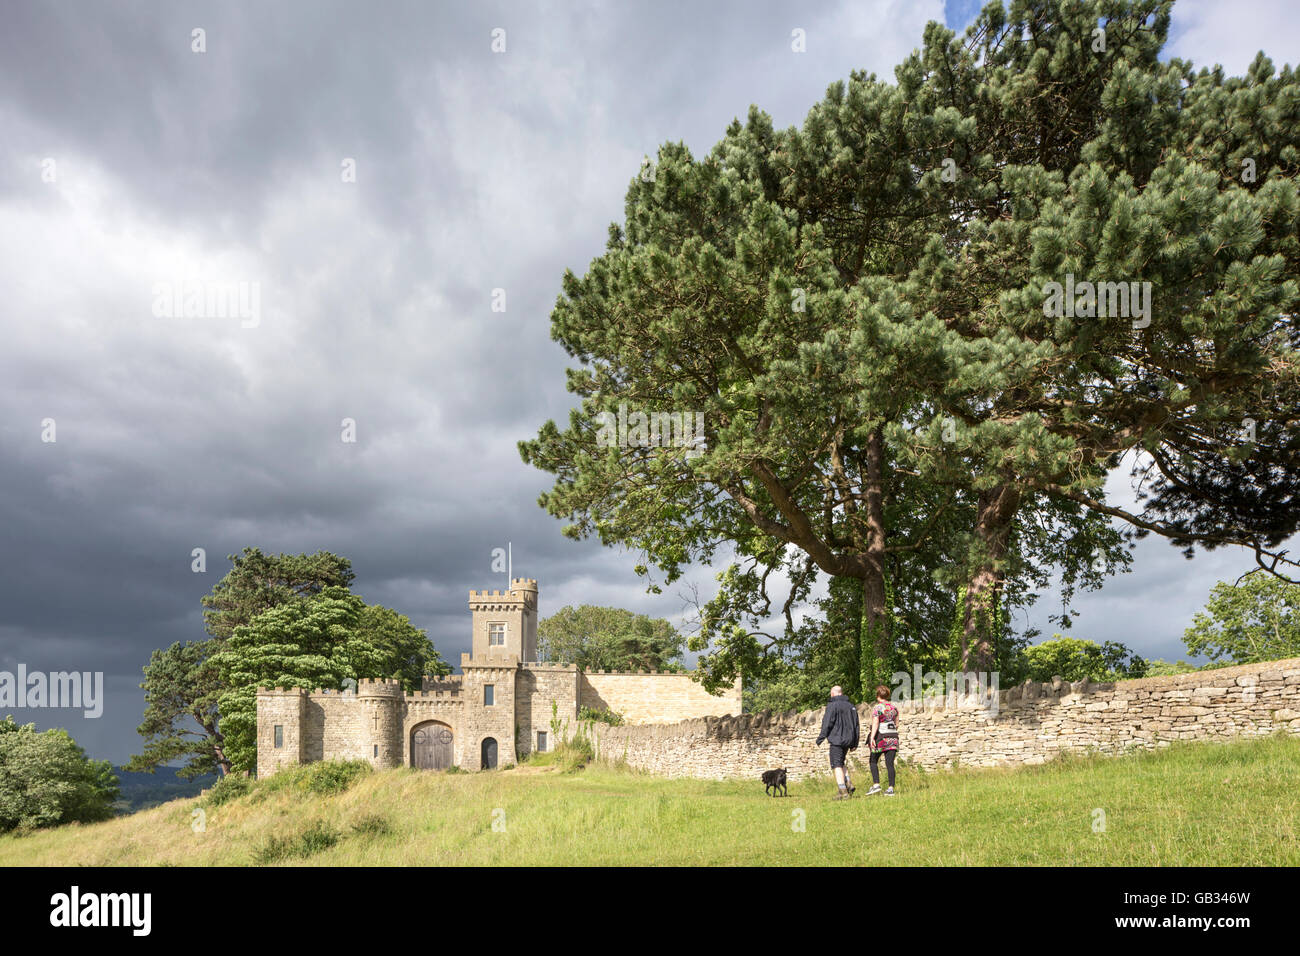 The local folly known as Rodborough Fort or Fort George on Rodborough Common, Stroud, Gloucestershire, England, UK Stock Photo